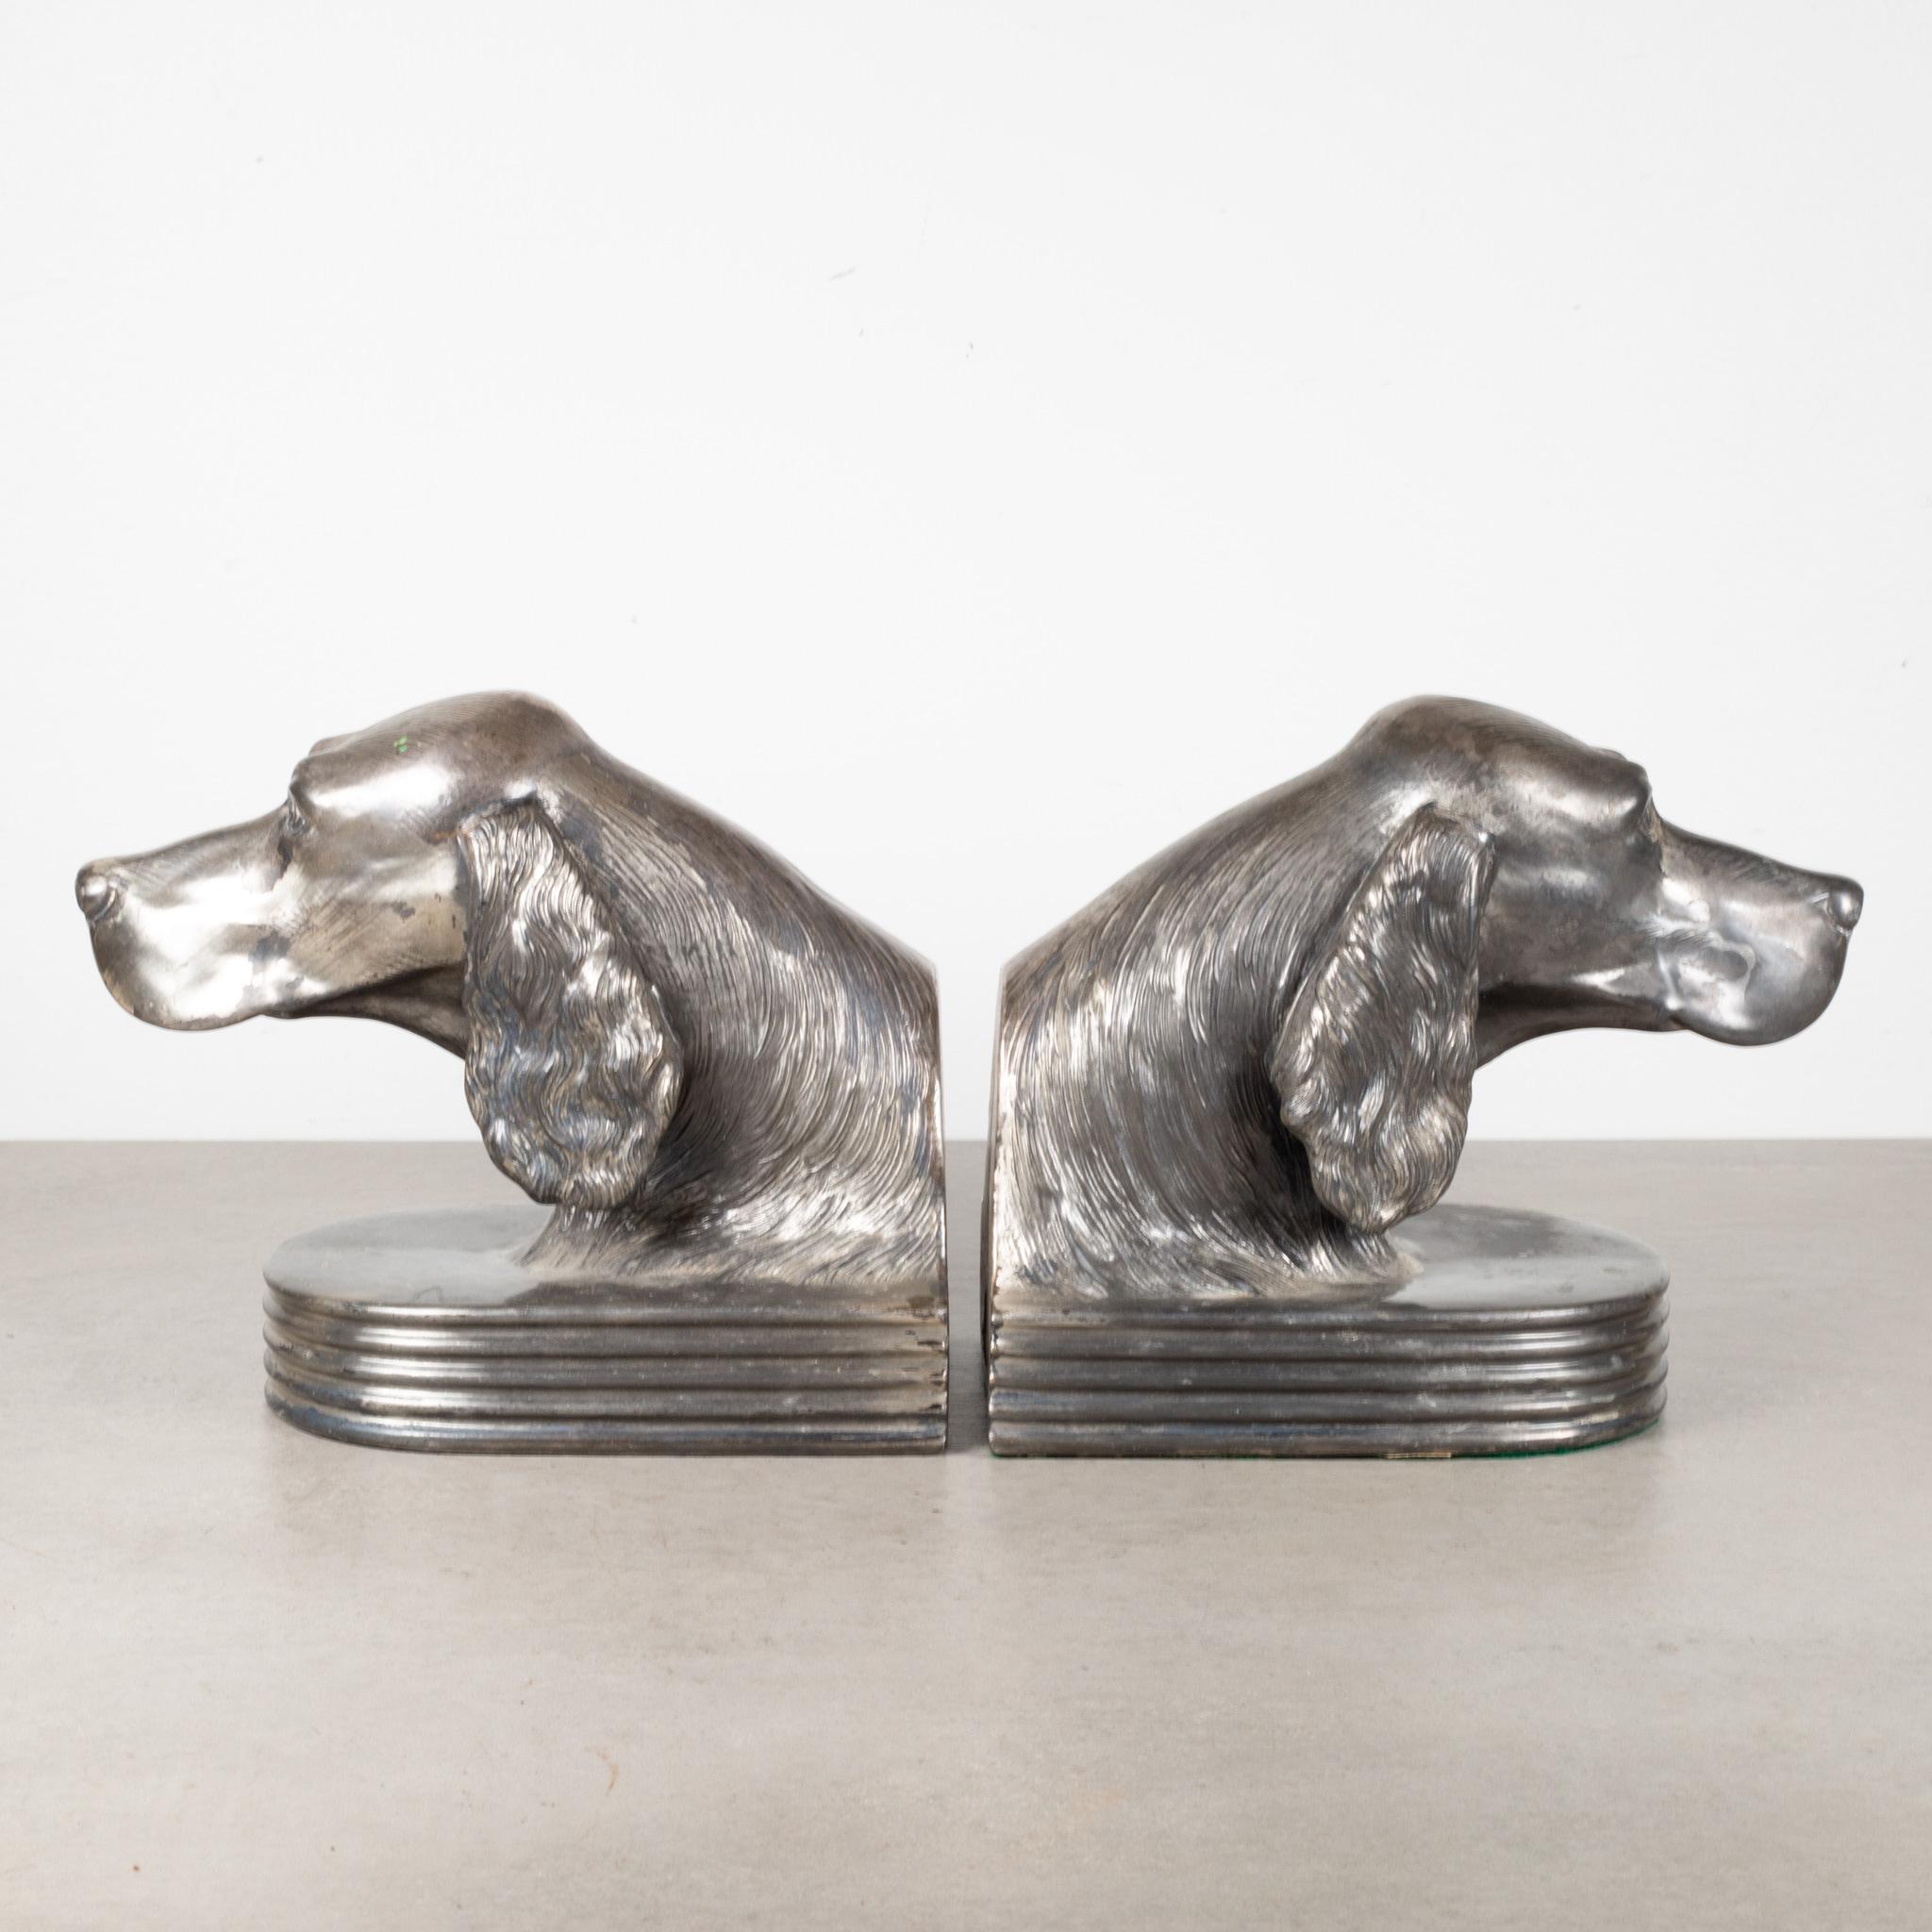 About

Art Deco cast grey metal Irish Setter or Pointer bookends manufactured by Jennings Brothers. Embossed 